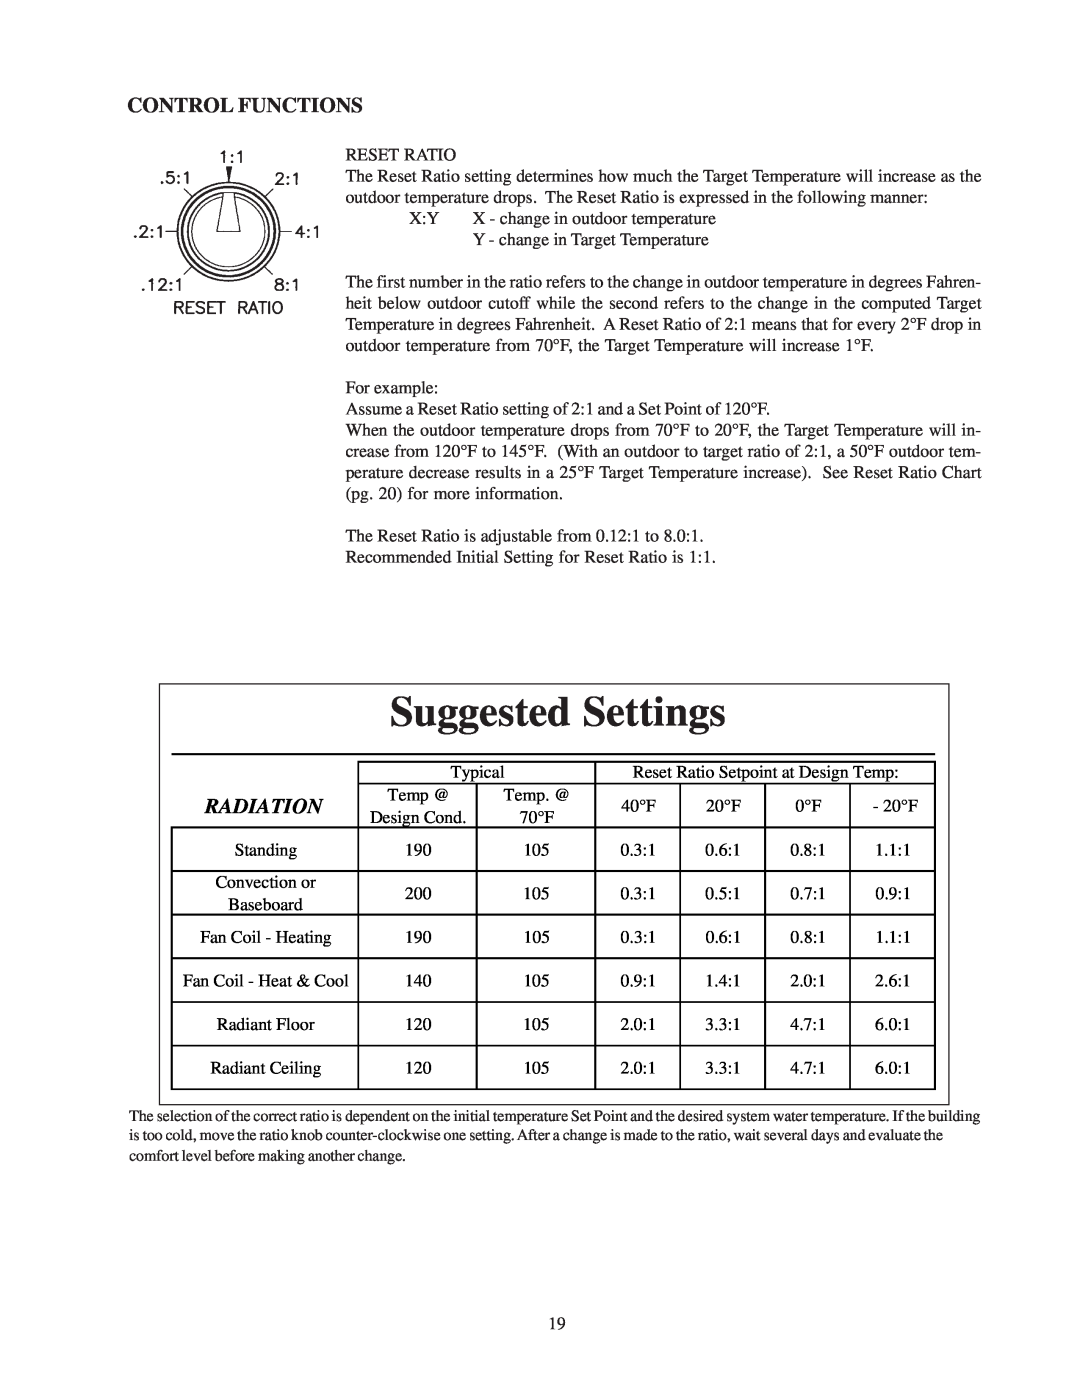 Raypak 240692 manual Suggested Settings, Control Functions, Radiation 